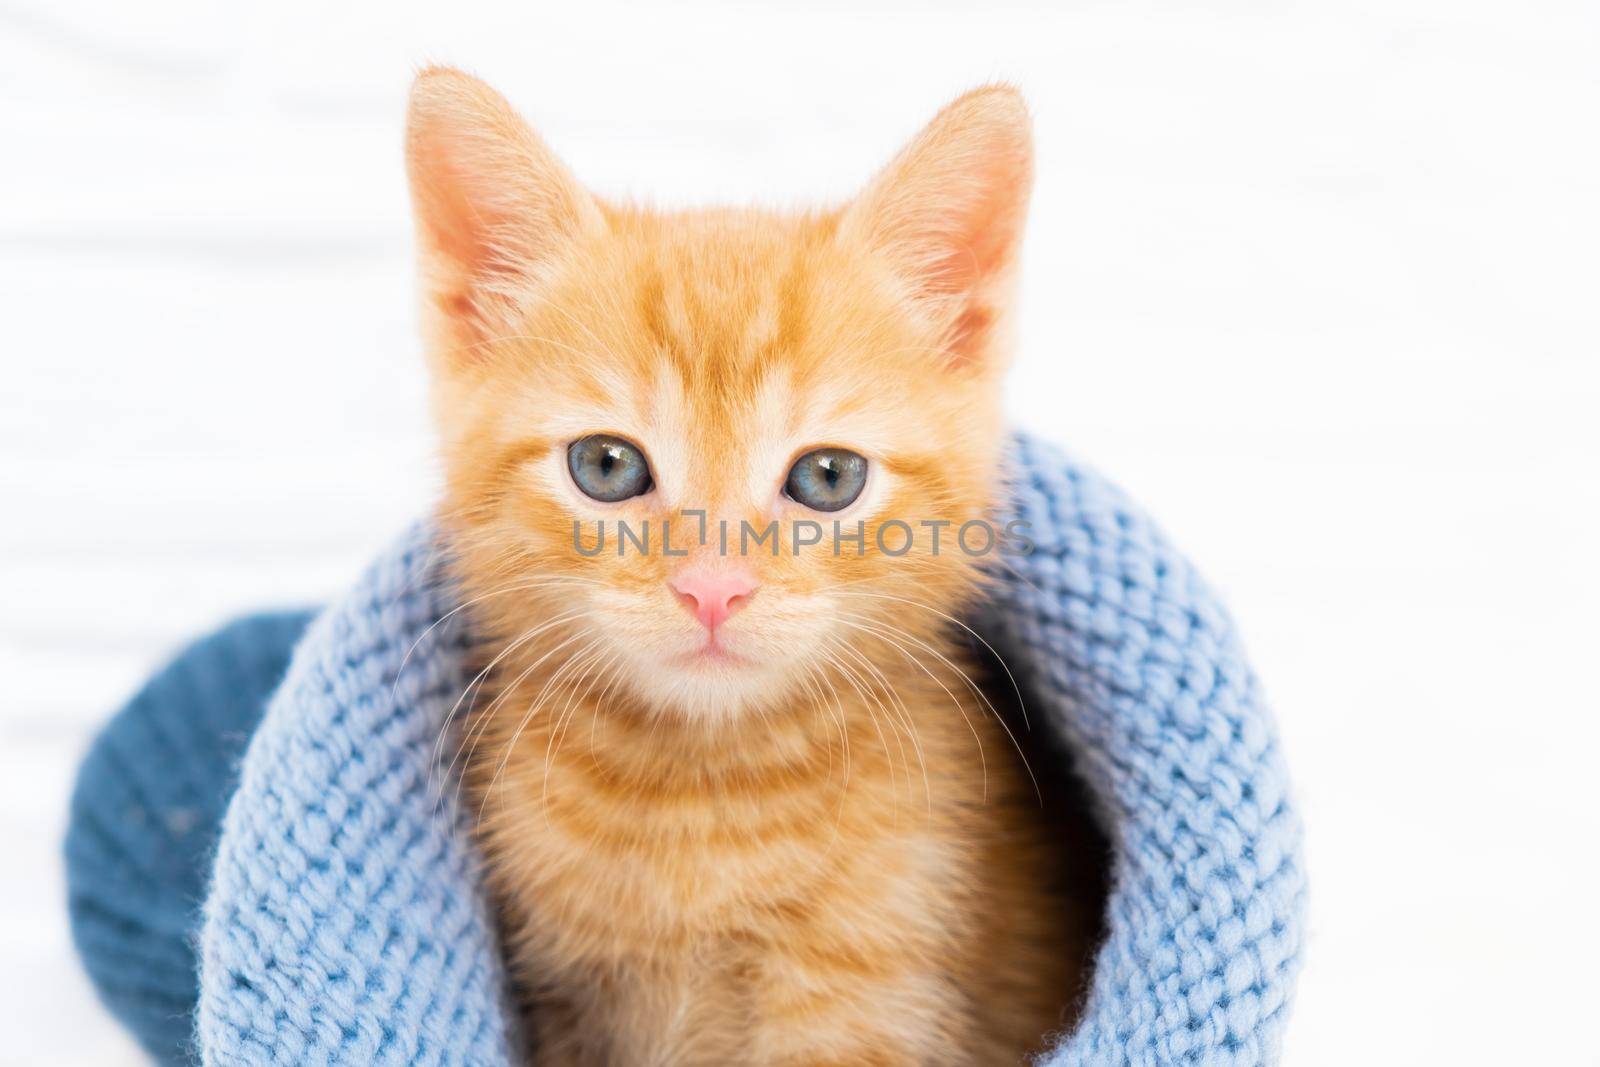 Small Valentines orange kitten is sweetly basking and looking at the camera in a knitted blue hat with copyspace. Soft and cozy. Christmas, home comfort and new year holidays, Valentines Day concept.